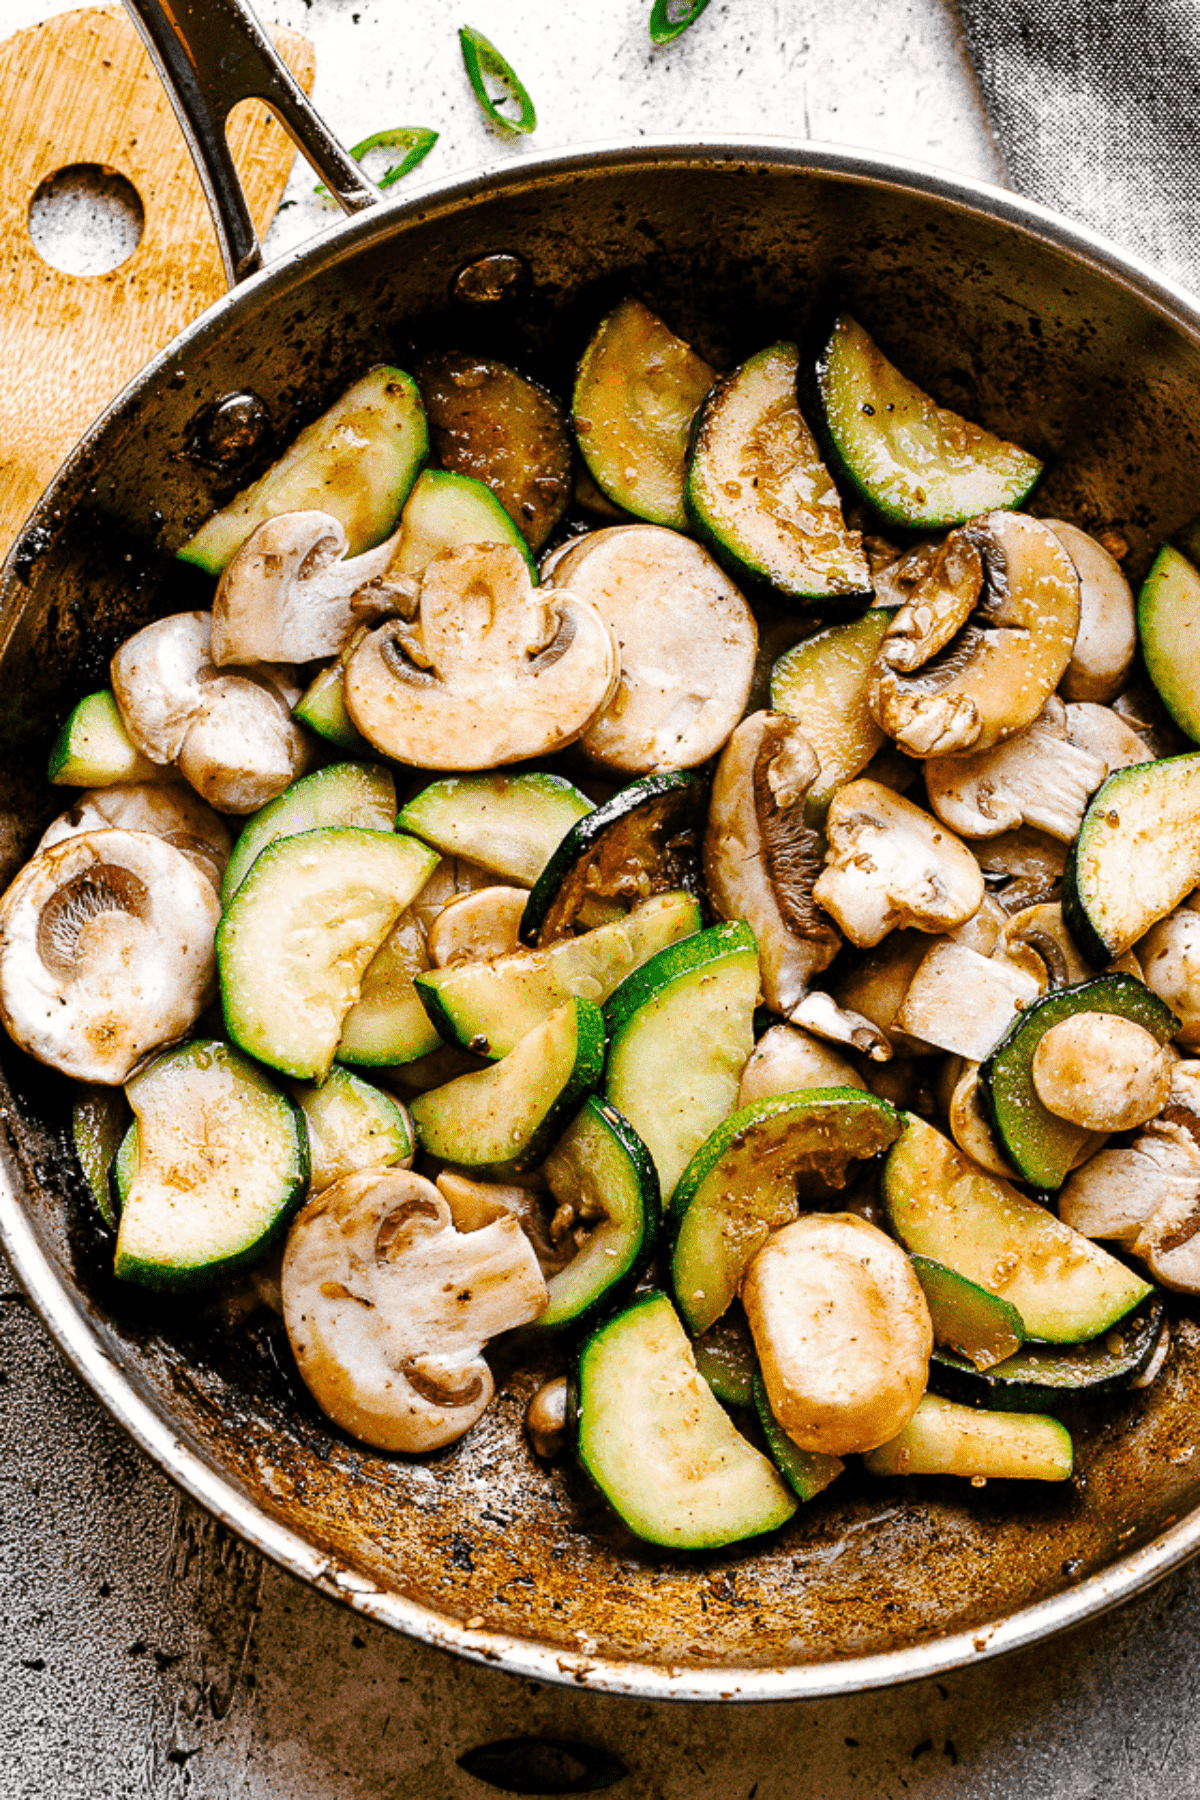 Stir frying sliced zucchini and mushrooms in a skillet.